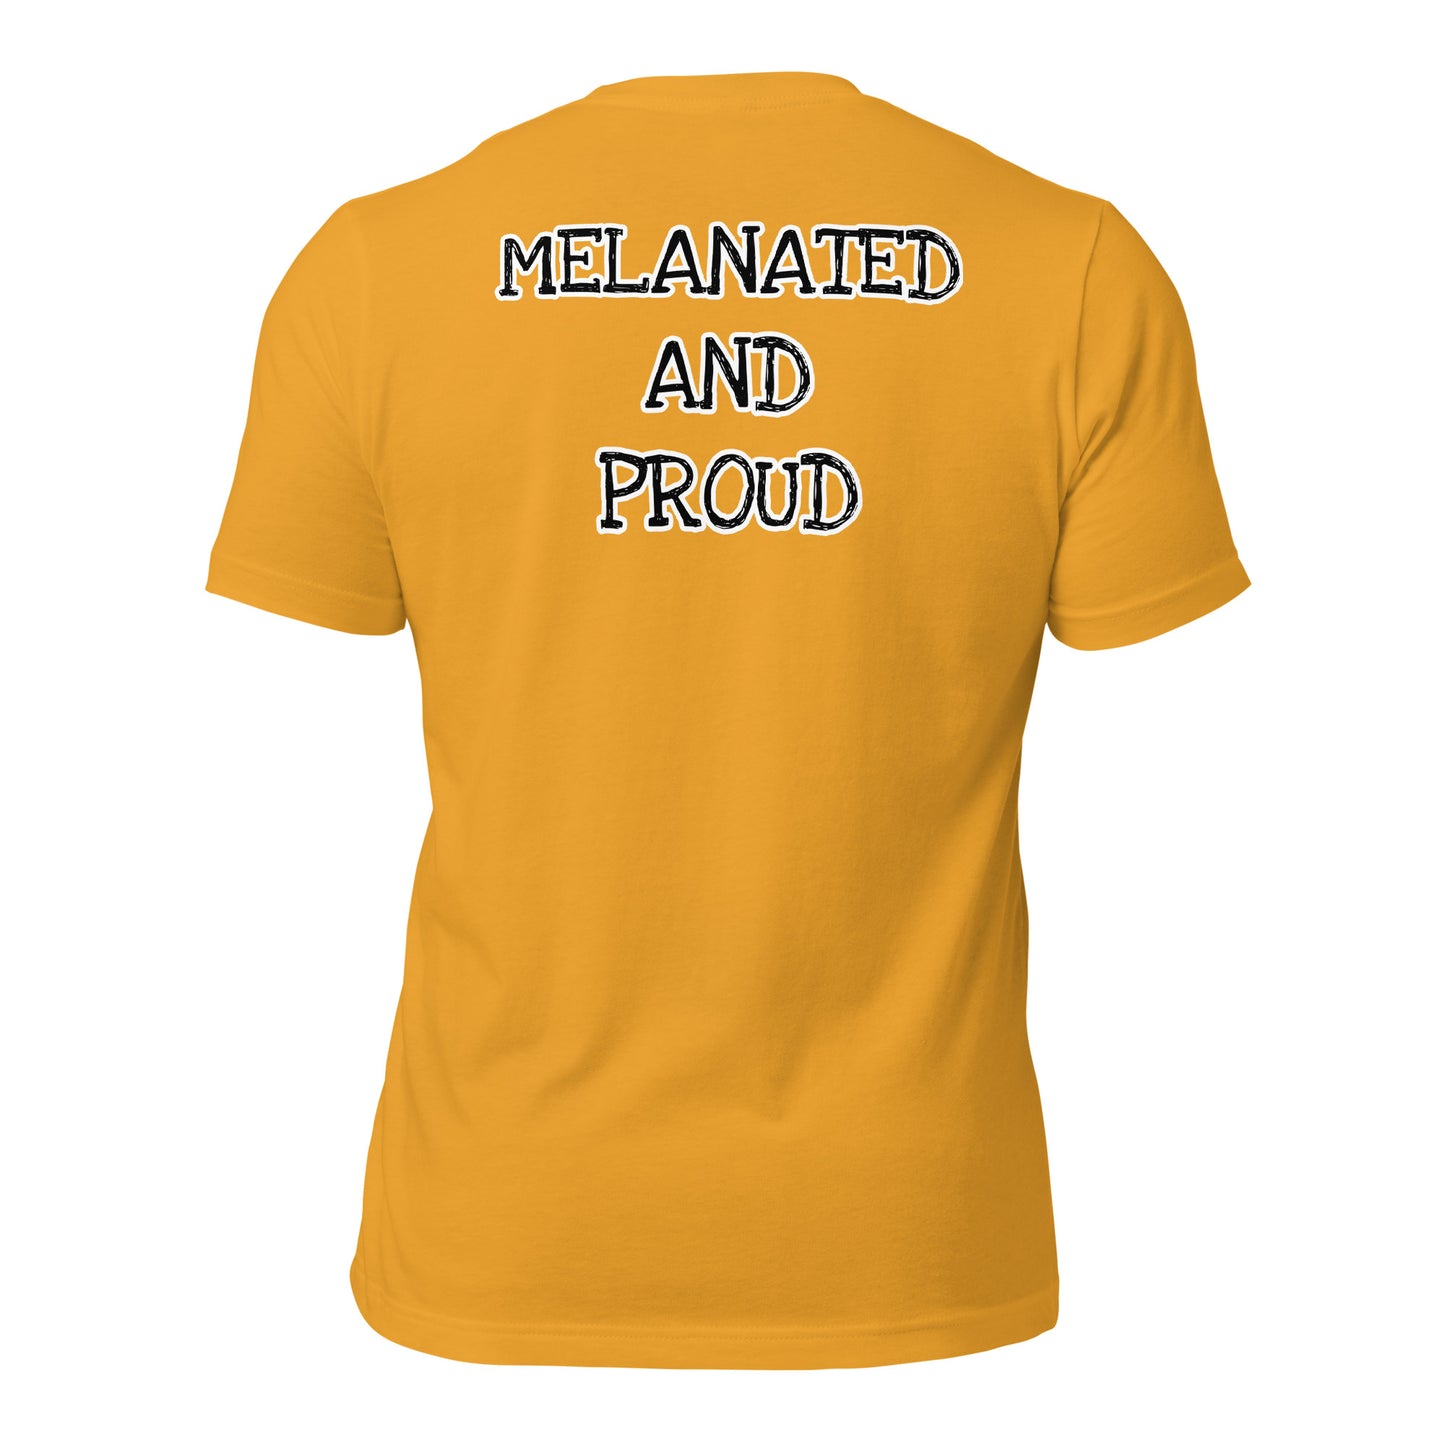 MELANATED AND PROUD